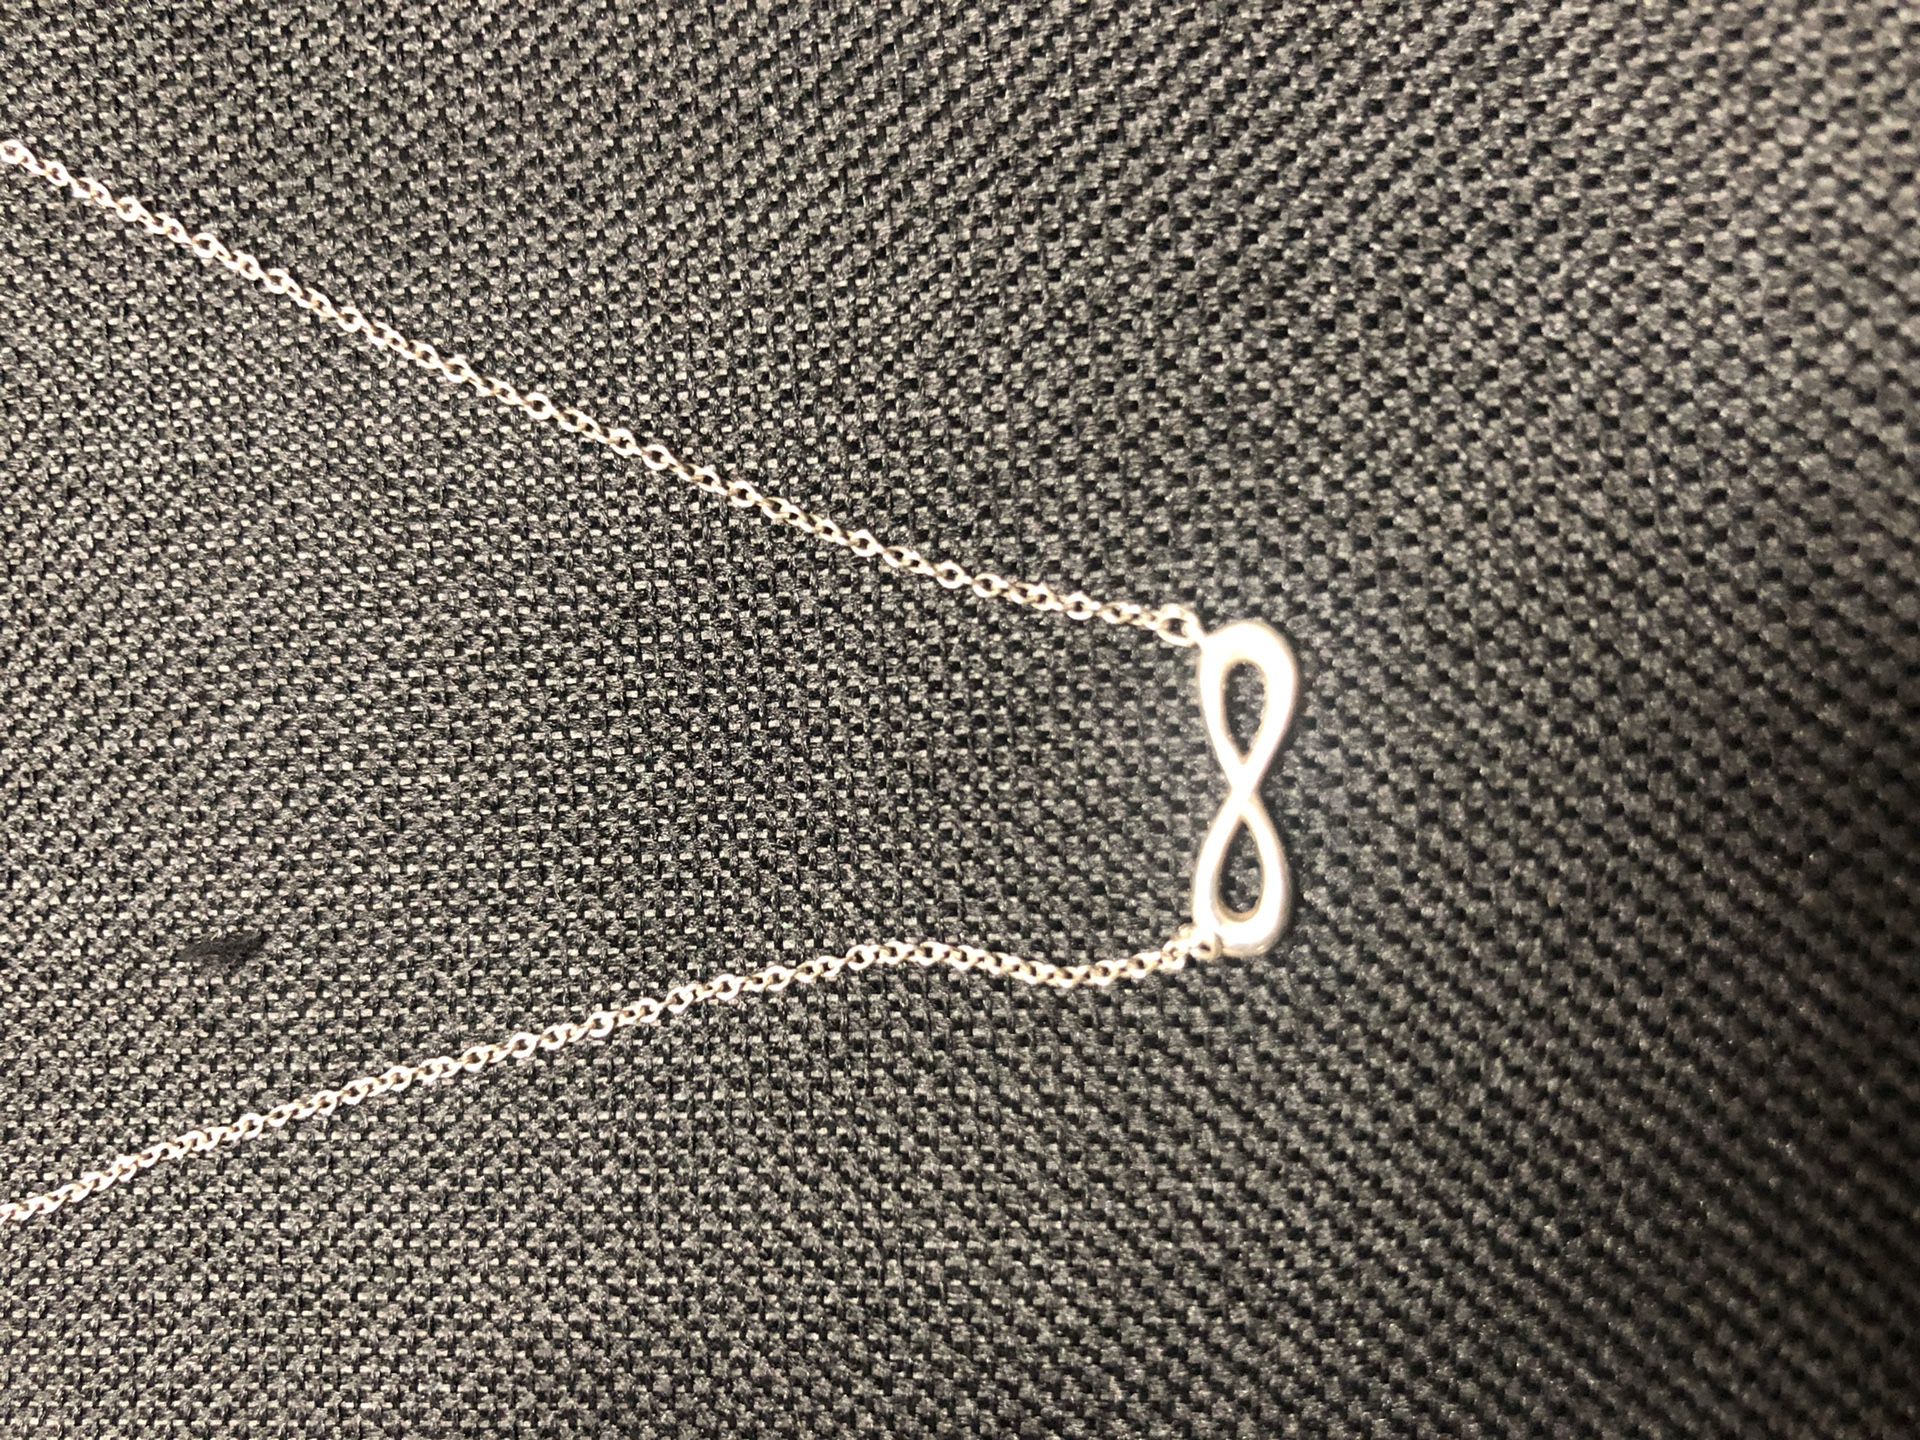 Tiffany Infinity Necklace- authentic